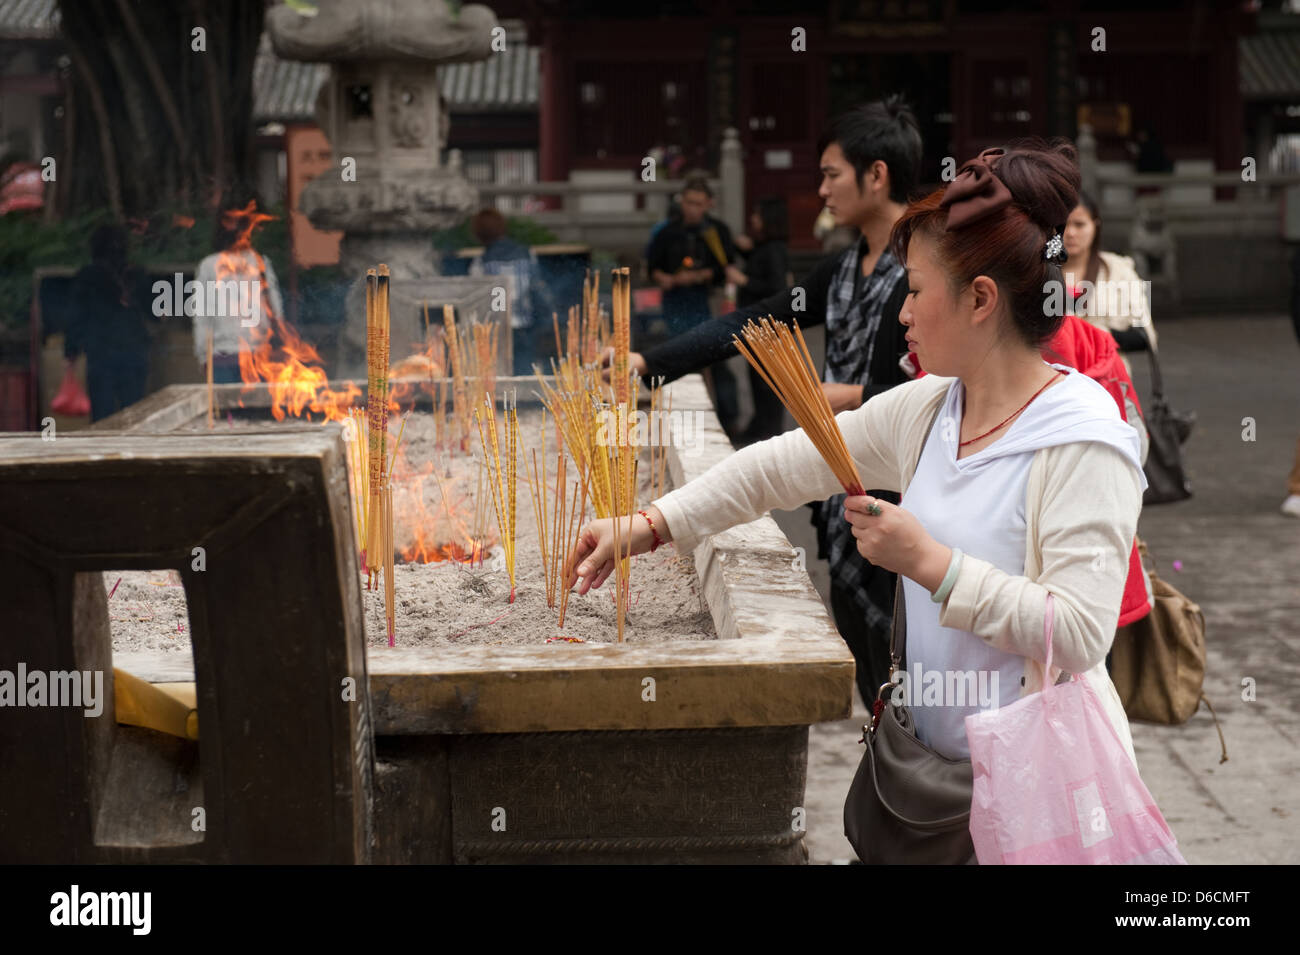 Guangzhou, China, Feuerstaette for incense sticks in the yard of Filial Piety Temple Stock Photo